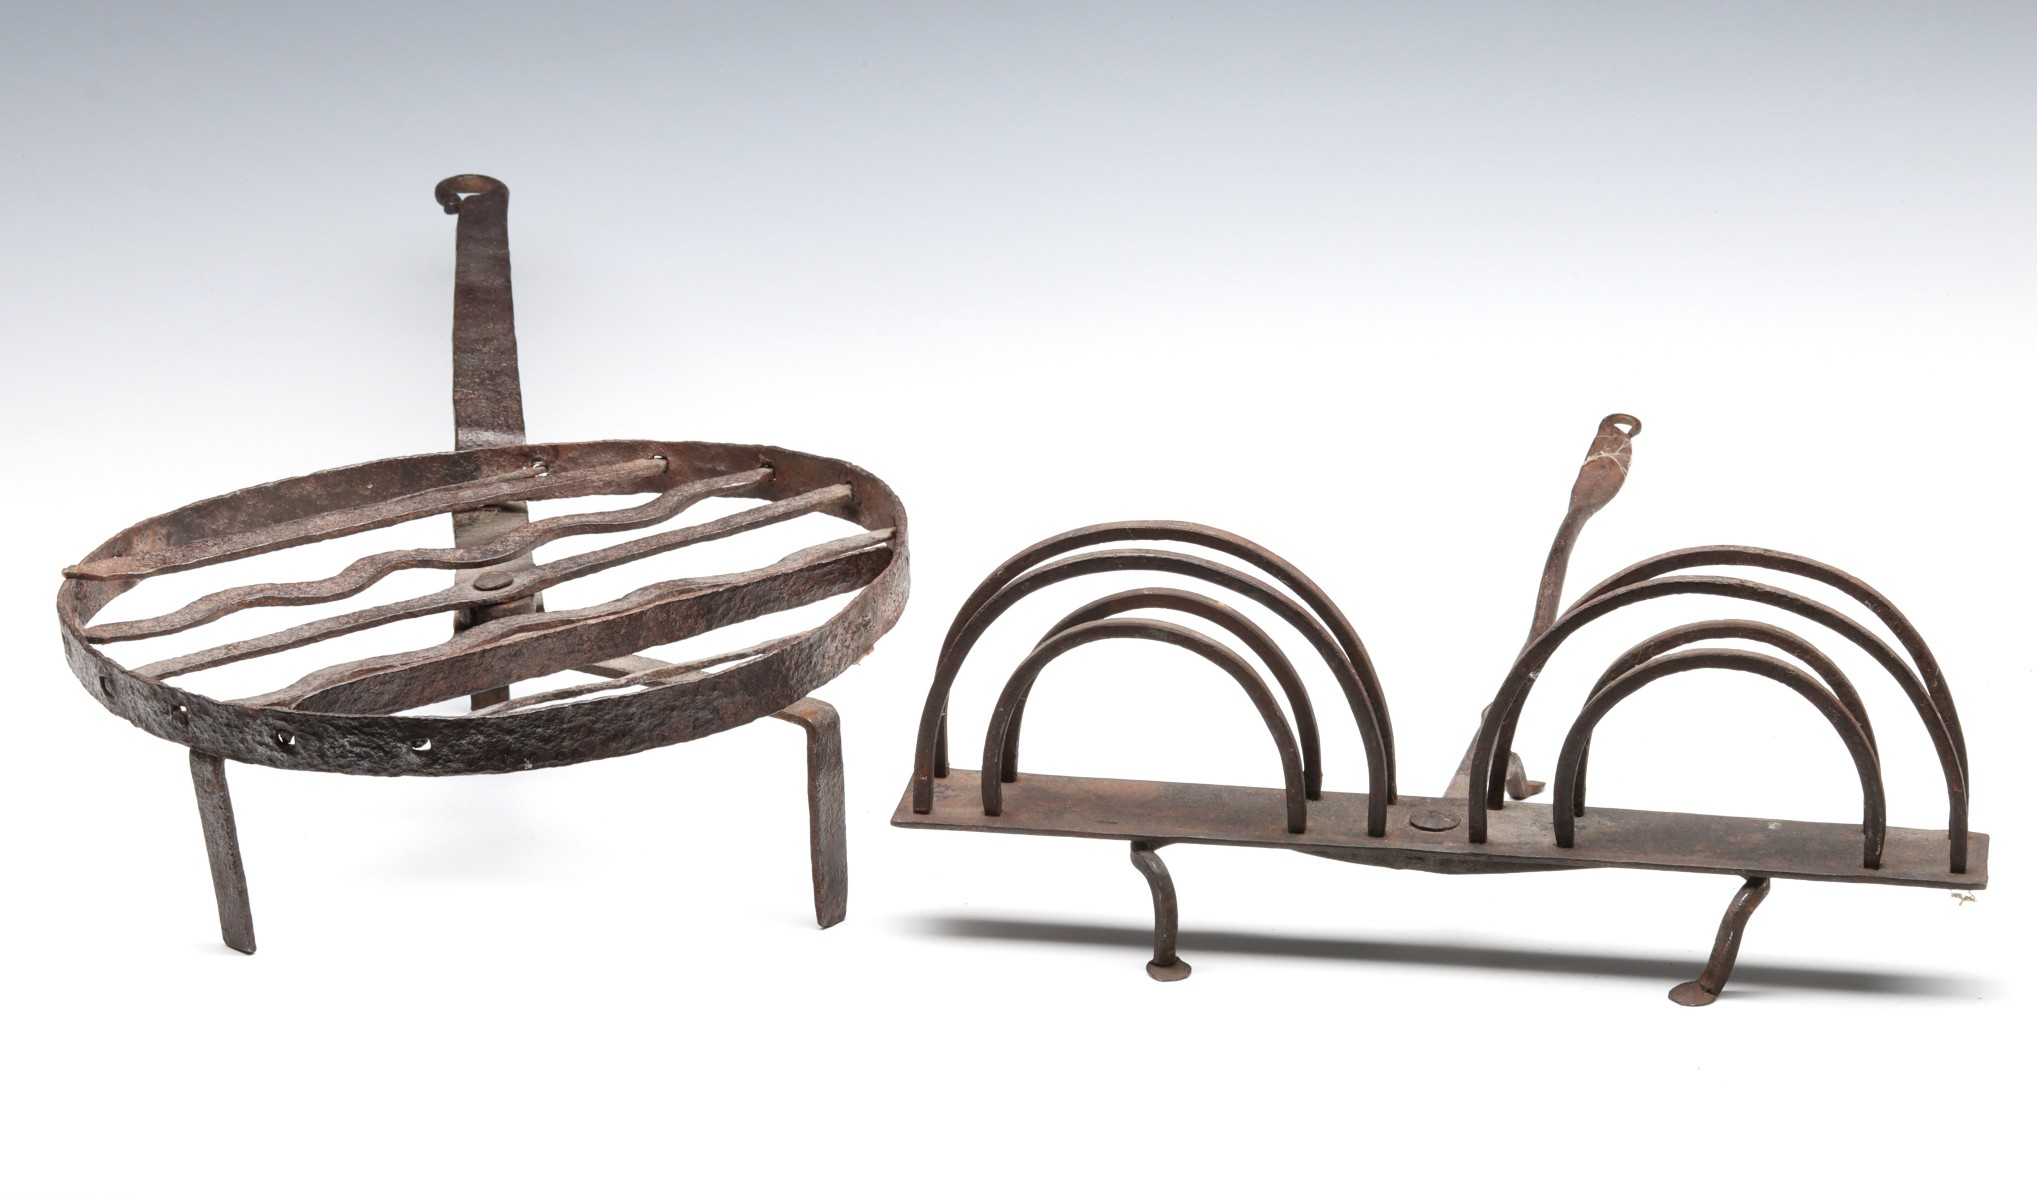 WROUGHT IRON TOASTER AND REVOLVING TRIVET C. 1800